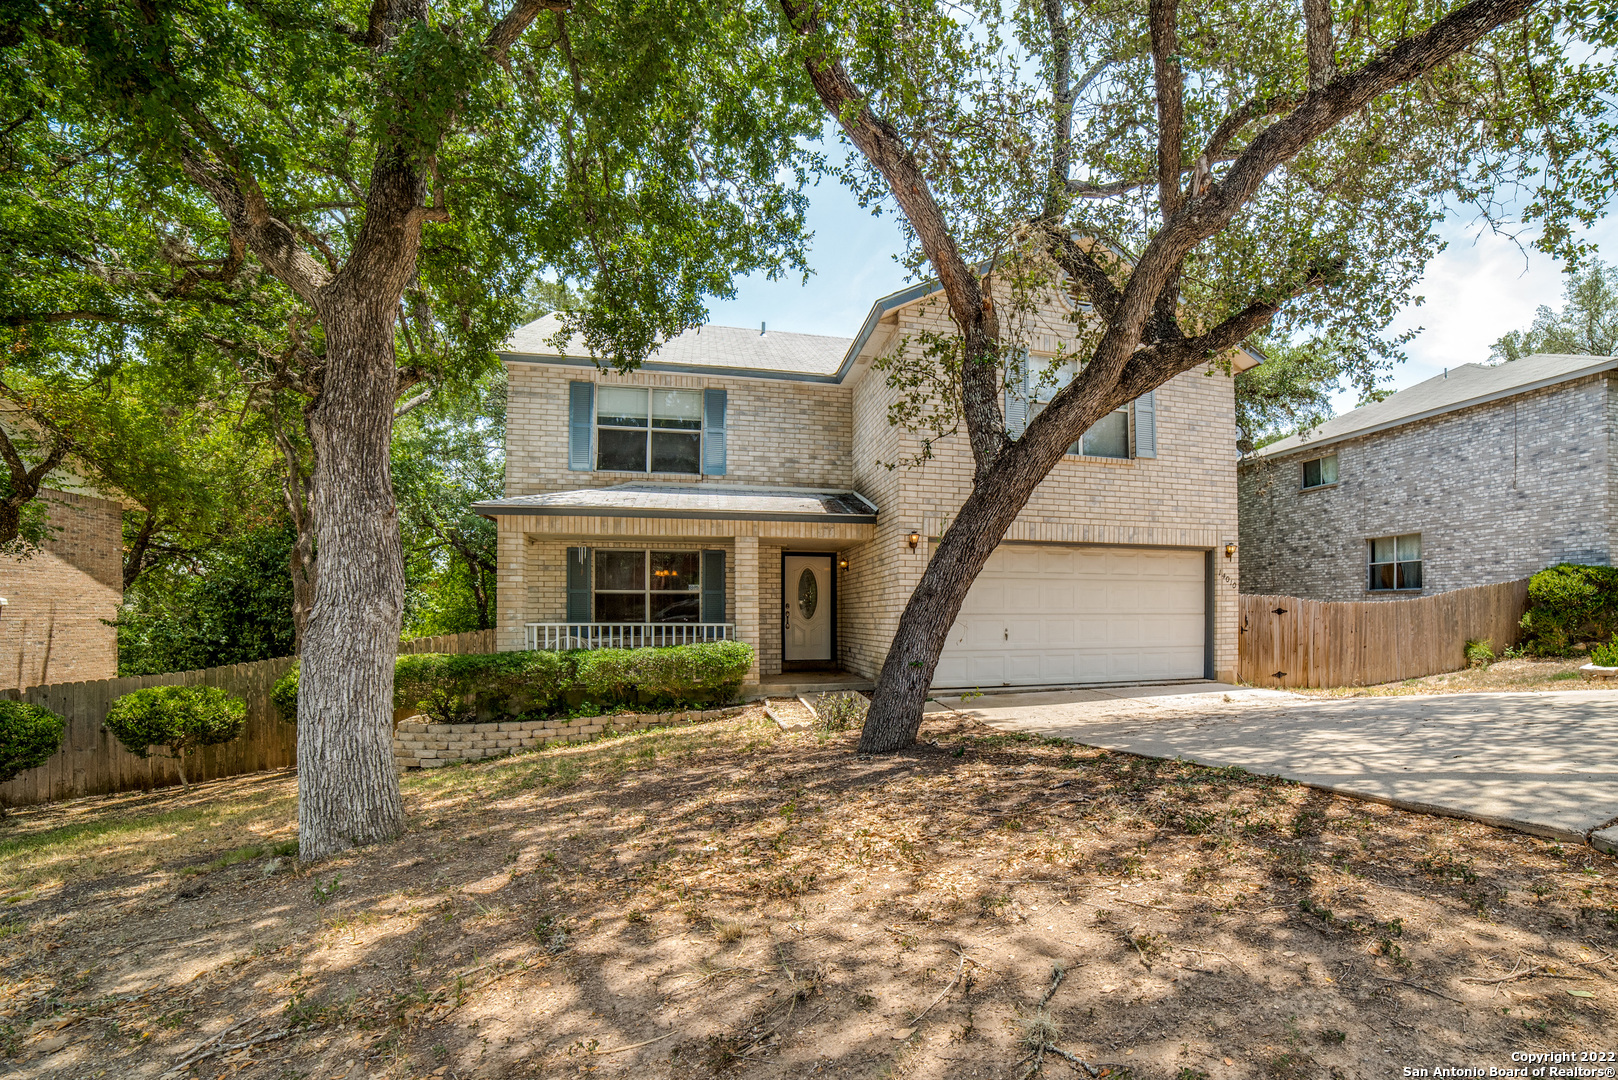 ***Wow! Beautiful Home Located in a Well Established Neighborhood**Awesome Location That Provides an Easy Commute to UTSA, USAA, The Rim, La Cantera, Shopping, Restaurants, 1604 & IH-10, Close to Medical Center, And So Much More! This Home Offers a Spacious Floor Plan w/ Two Living Areas, Two Dinning Areas, Great Kitchen w/ large Pantry/Utility Room, Crown Molding, Wood Floor Entry, Laminate Flooring, Nice Size Bedrooms, Large Master w/sitting Area, Garden Tub, Double Vanities.**Hurry!**